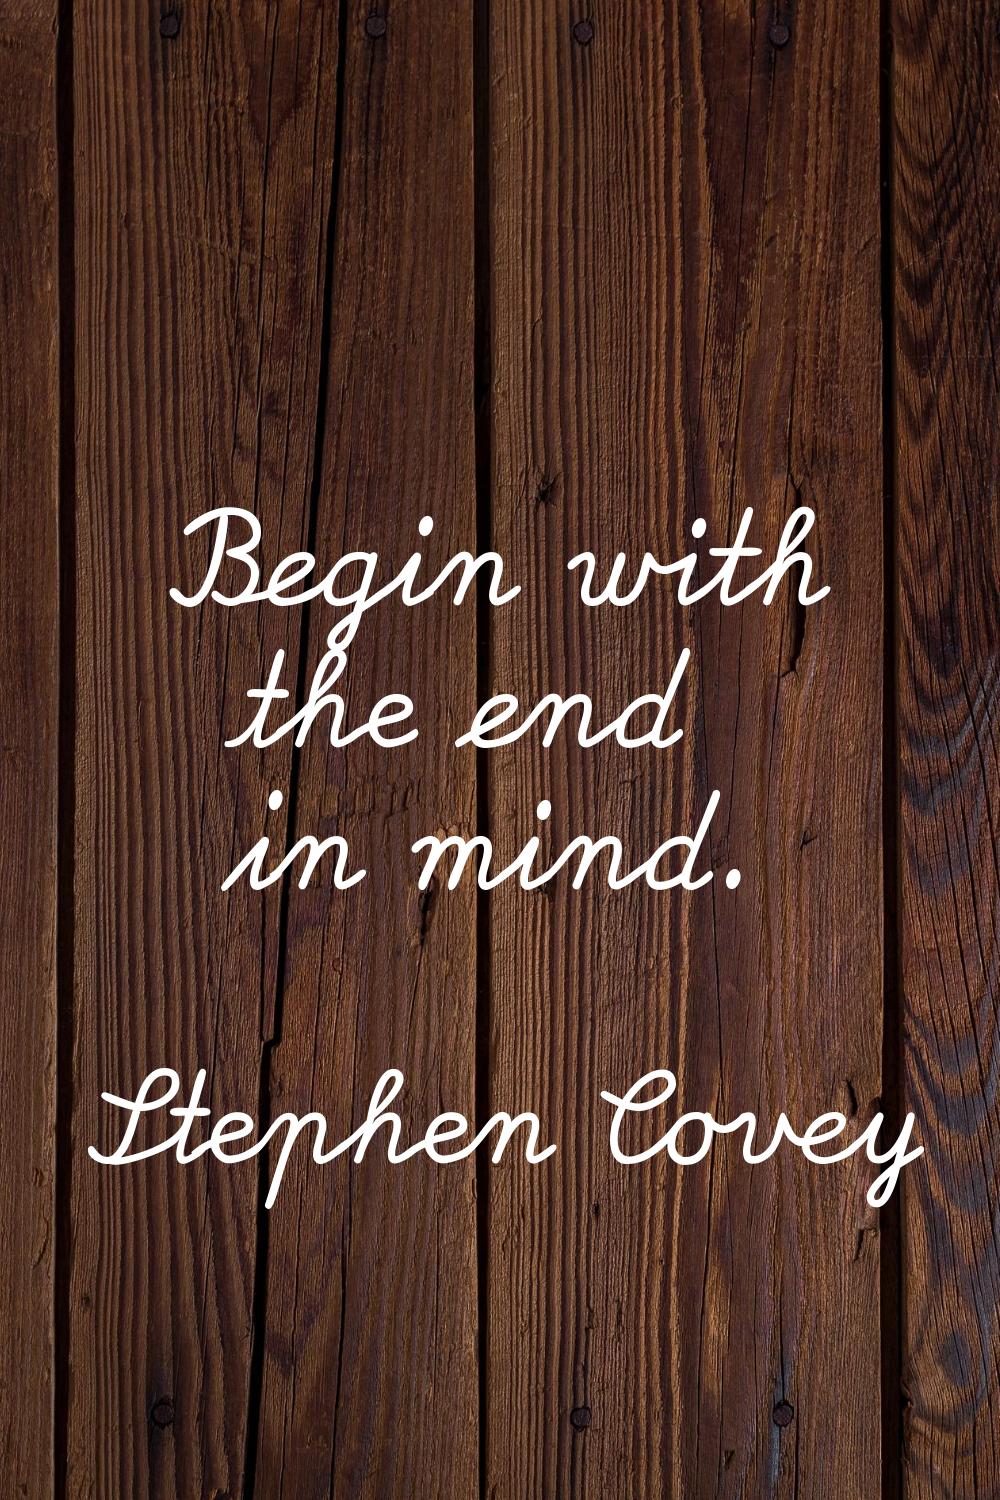 Begin with the end in mind.